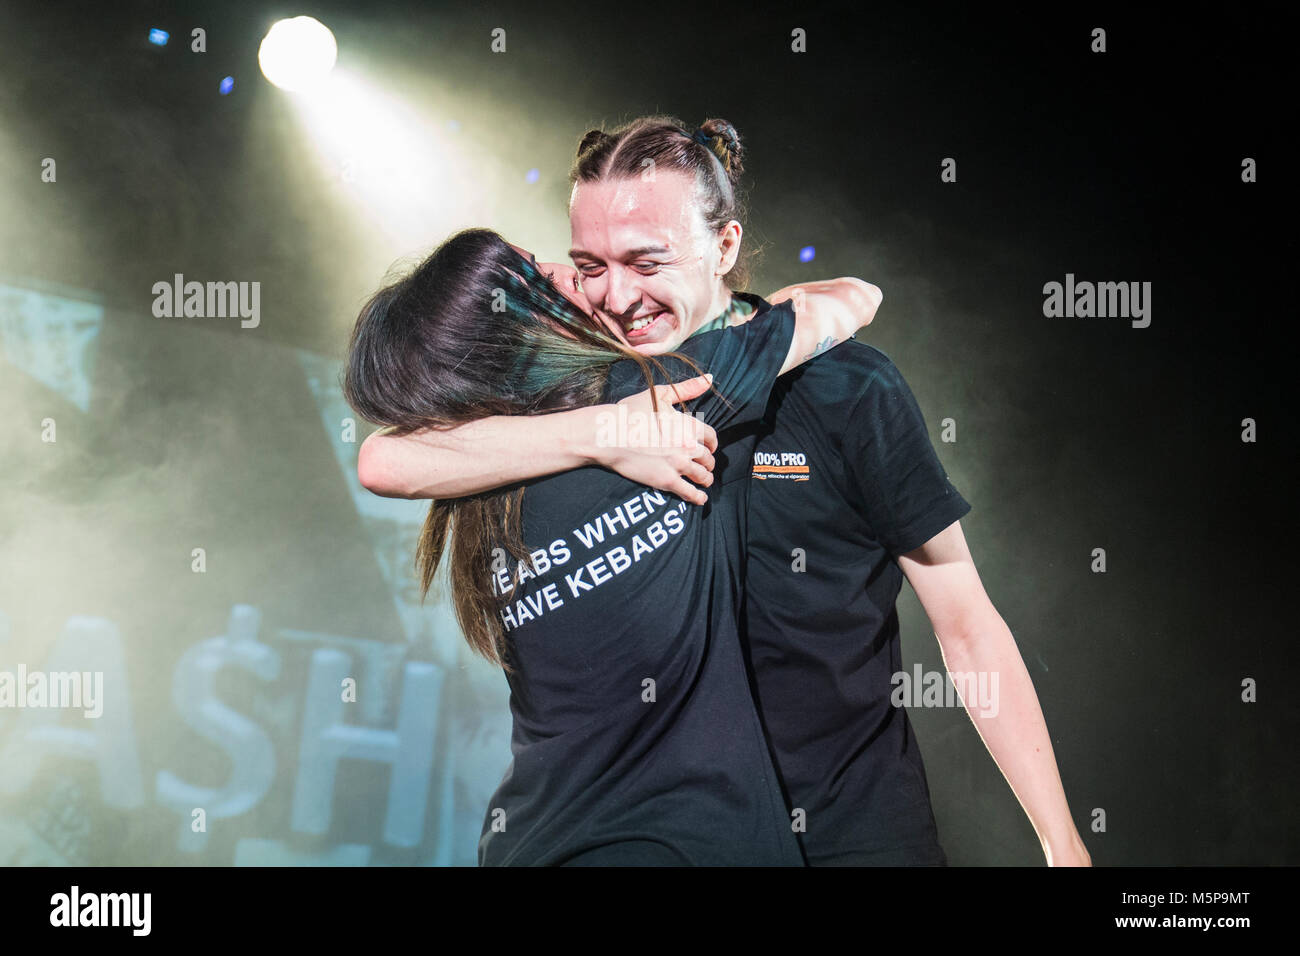 Barcelona, Spain. February 24, 2018. Concert by Tommy Cash in Apolo 2  organized by Houston Party. Photographer: © Aitor Rodero Stock Photo - Alamy